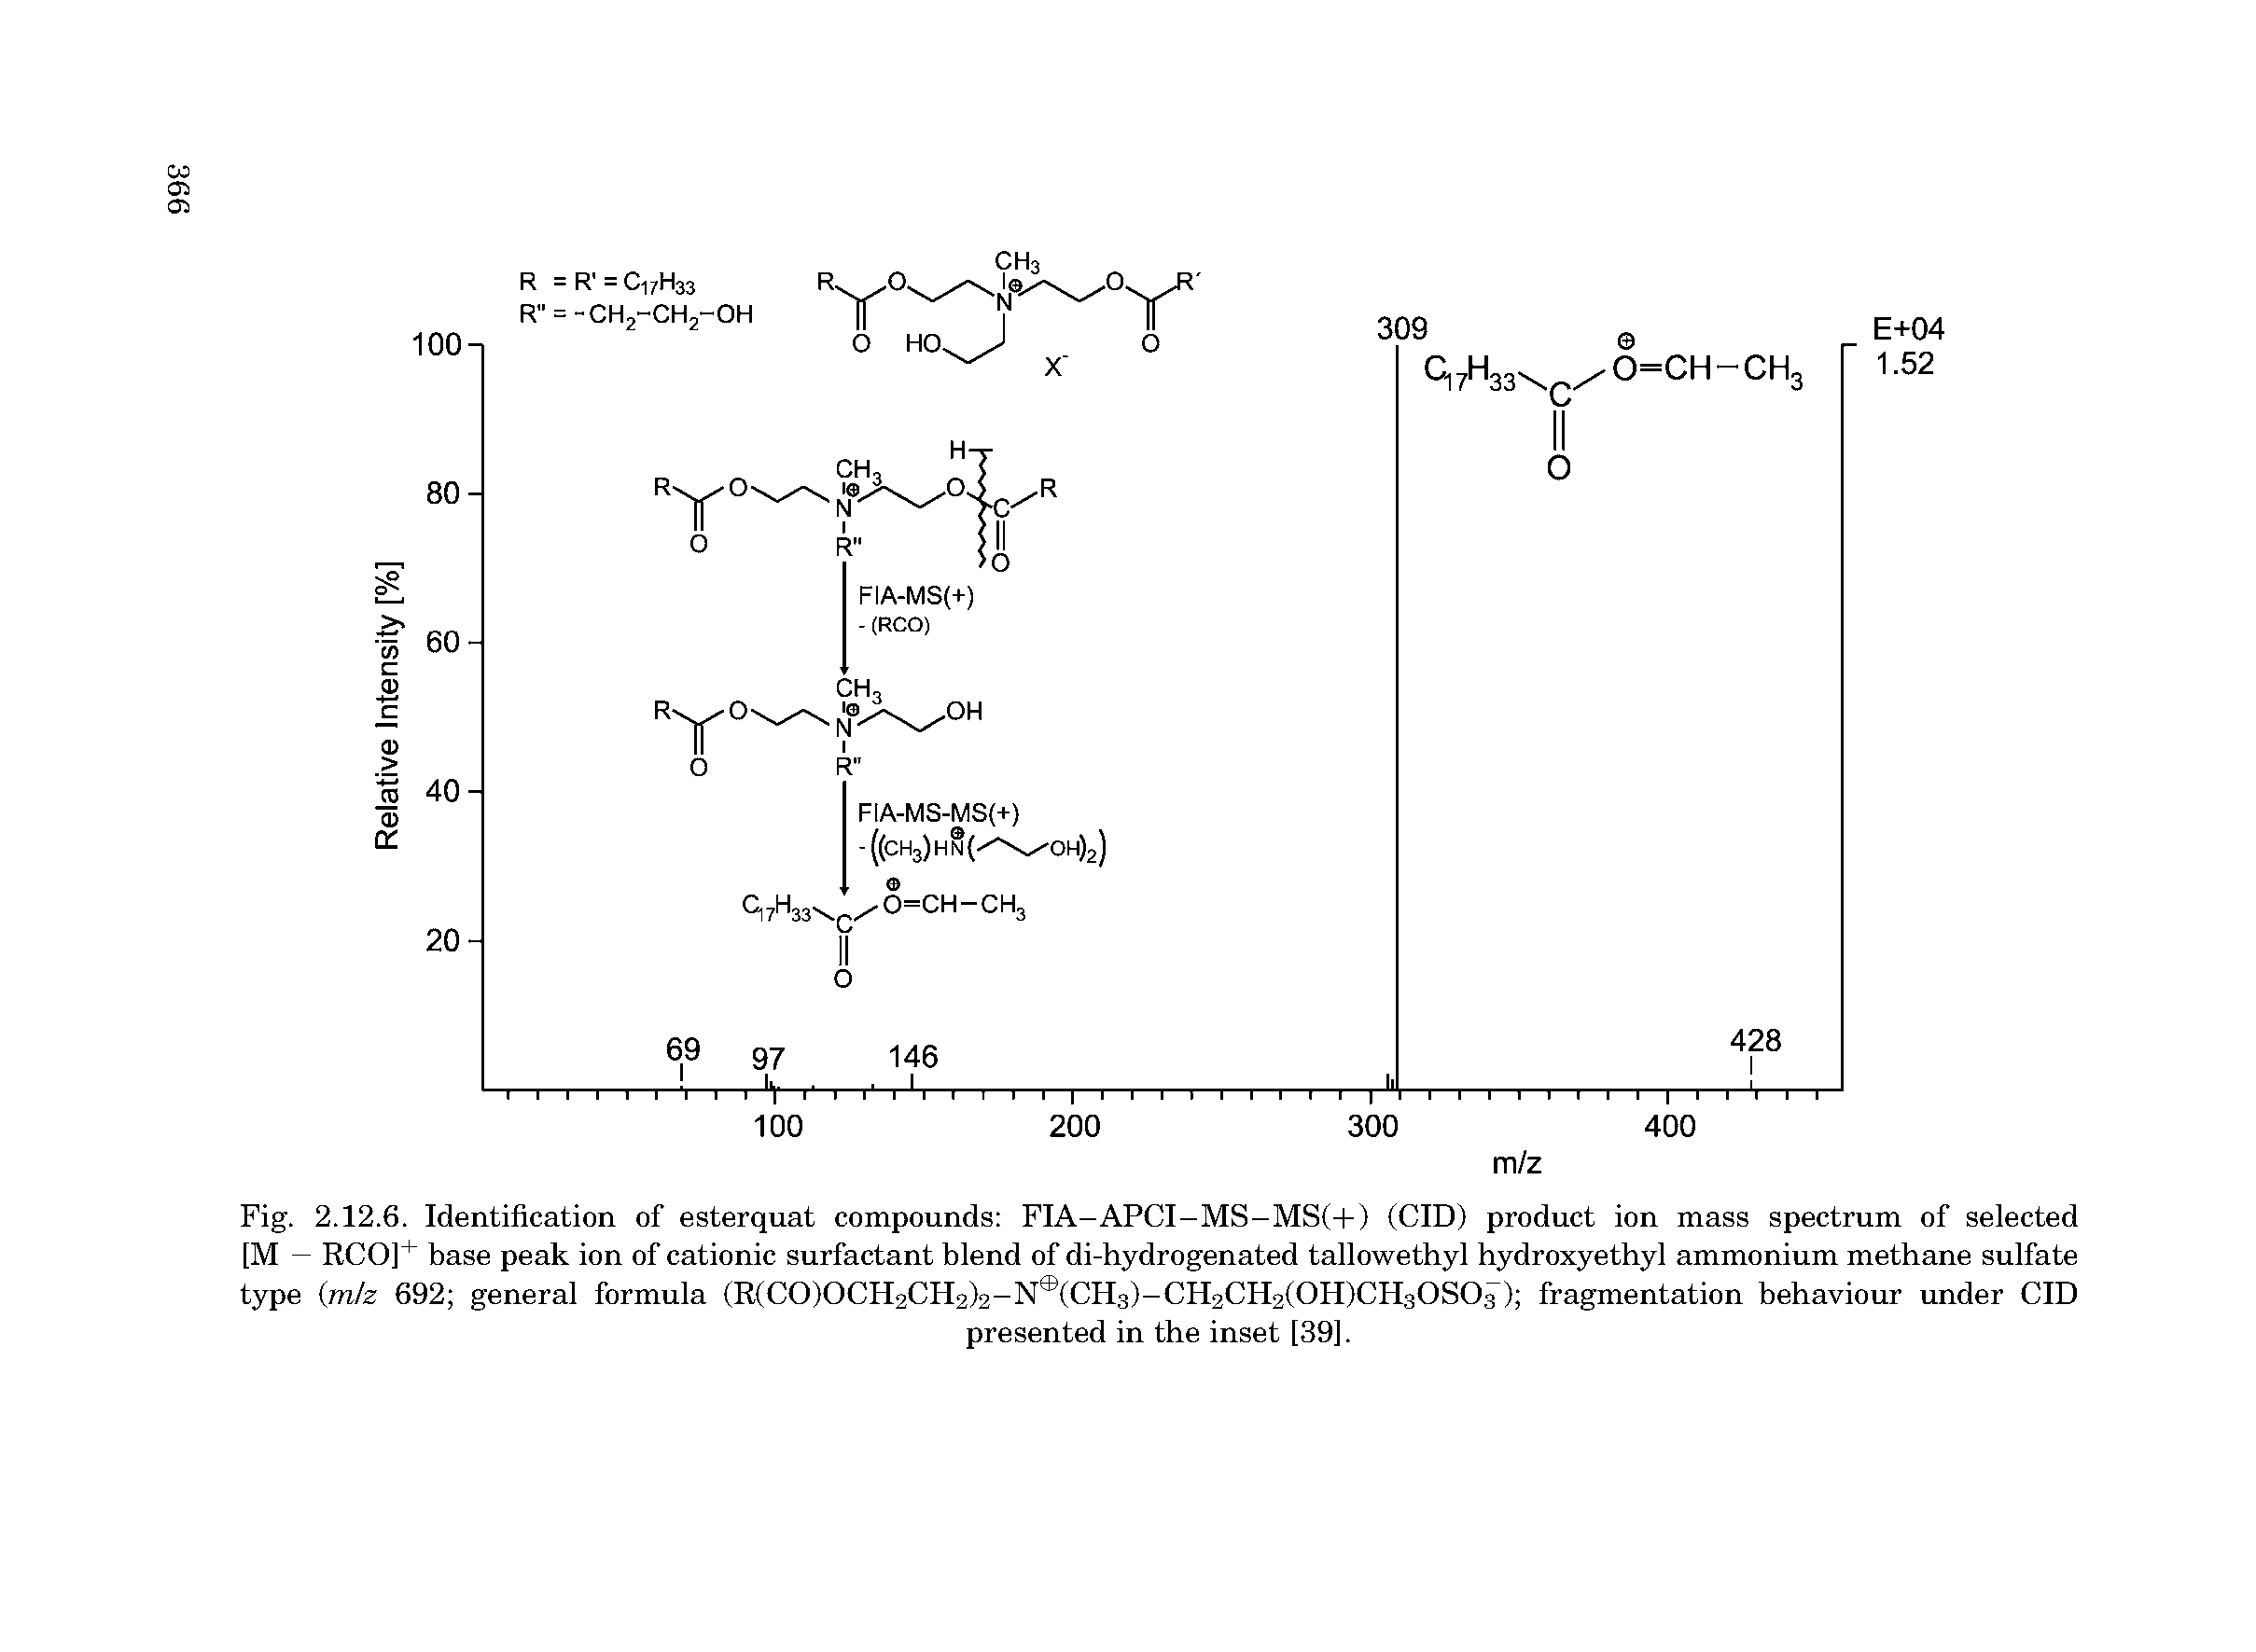 Fig. 2.12.6. Identification of esterquat compounds FIA-APCI-MS-MS(+) (CID) product ion mass spectrum of selected [M — RCO]+ base peak ion of cationic surfactant blend of di-hydrogenated tallowethyl hydroxyethyl ammonium methane sulfate type (mlz 692 general formula (R(C0)0CH2CH2)2-N (CH3)-CH2CH2(0H)CH30S03) fragmentation behaviour under CID...